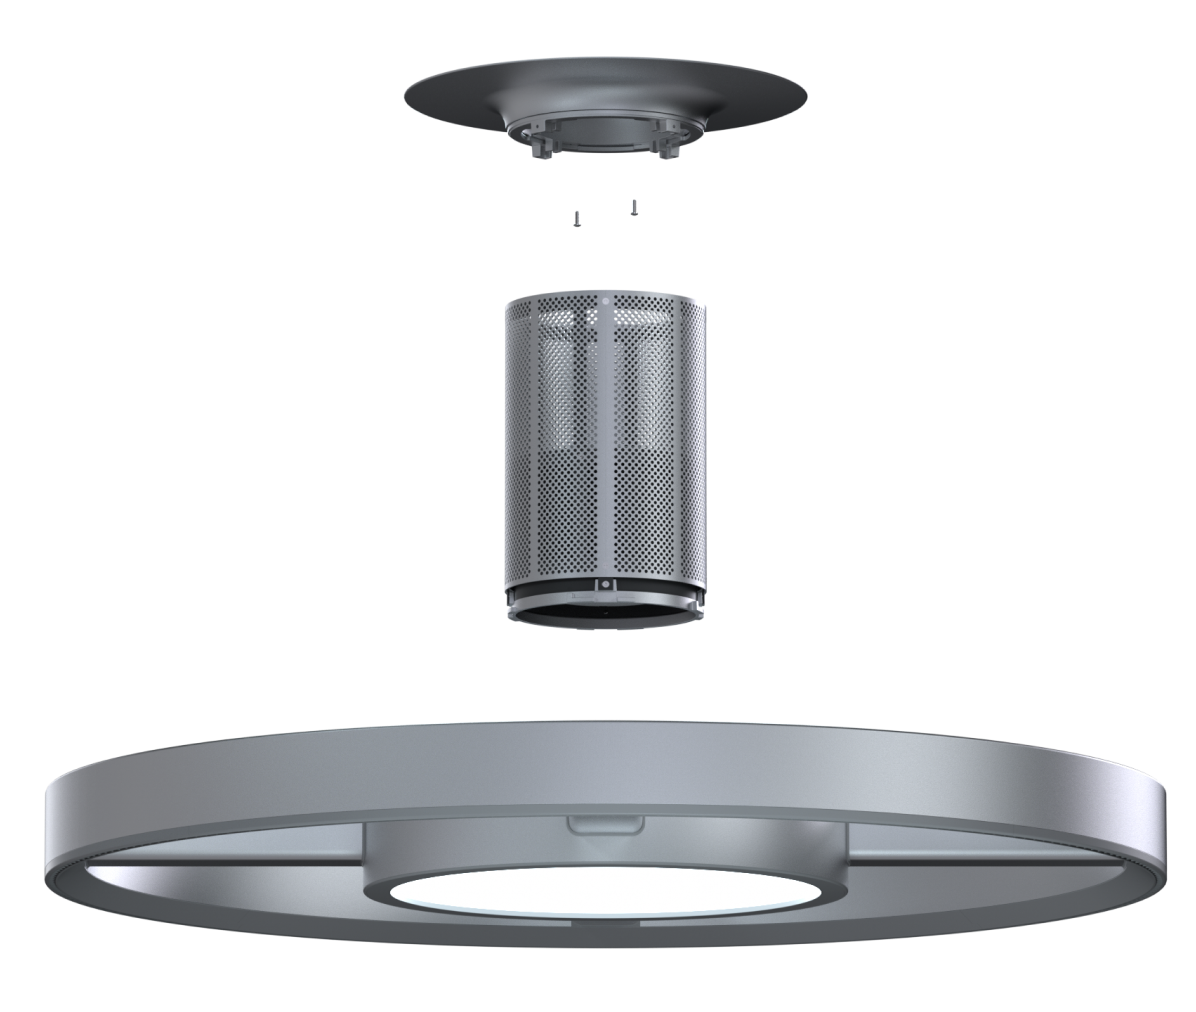 Halo bladeless ceiling fan setup structure